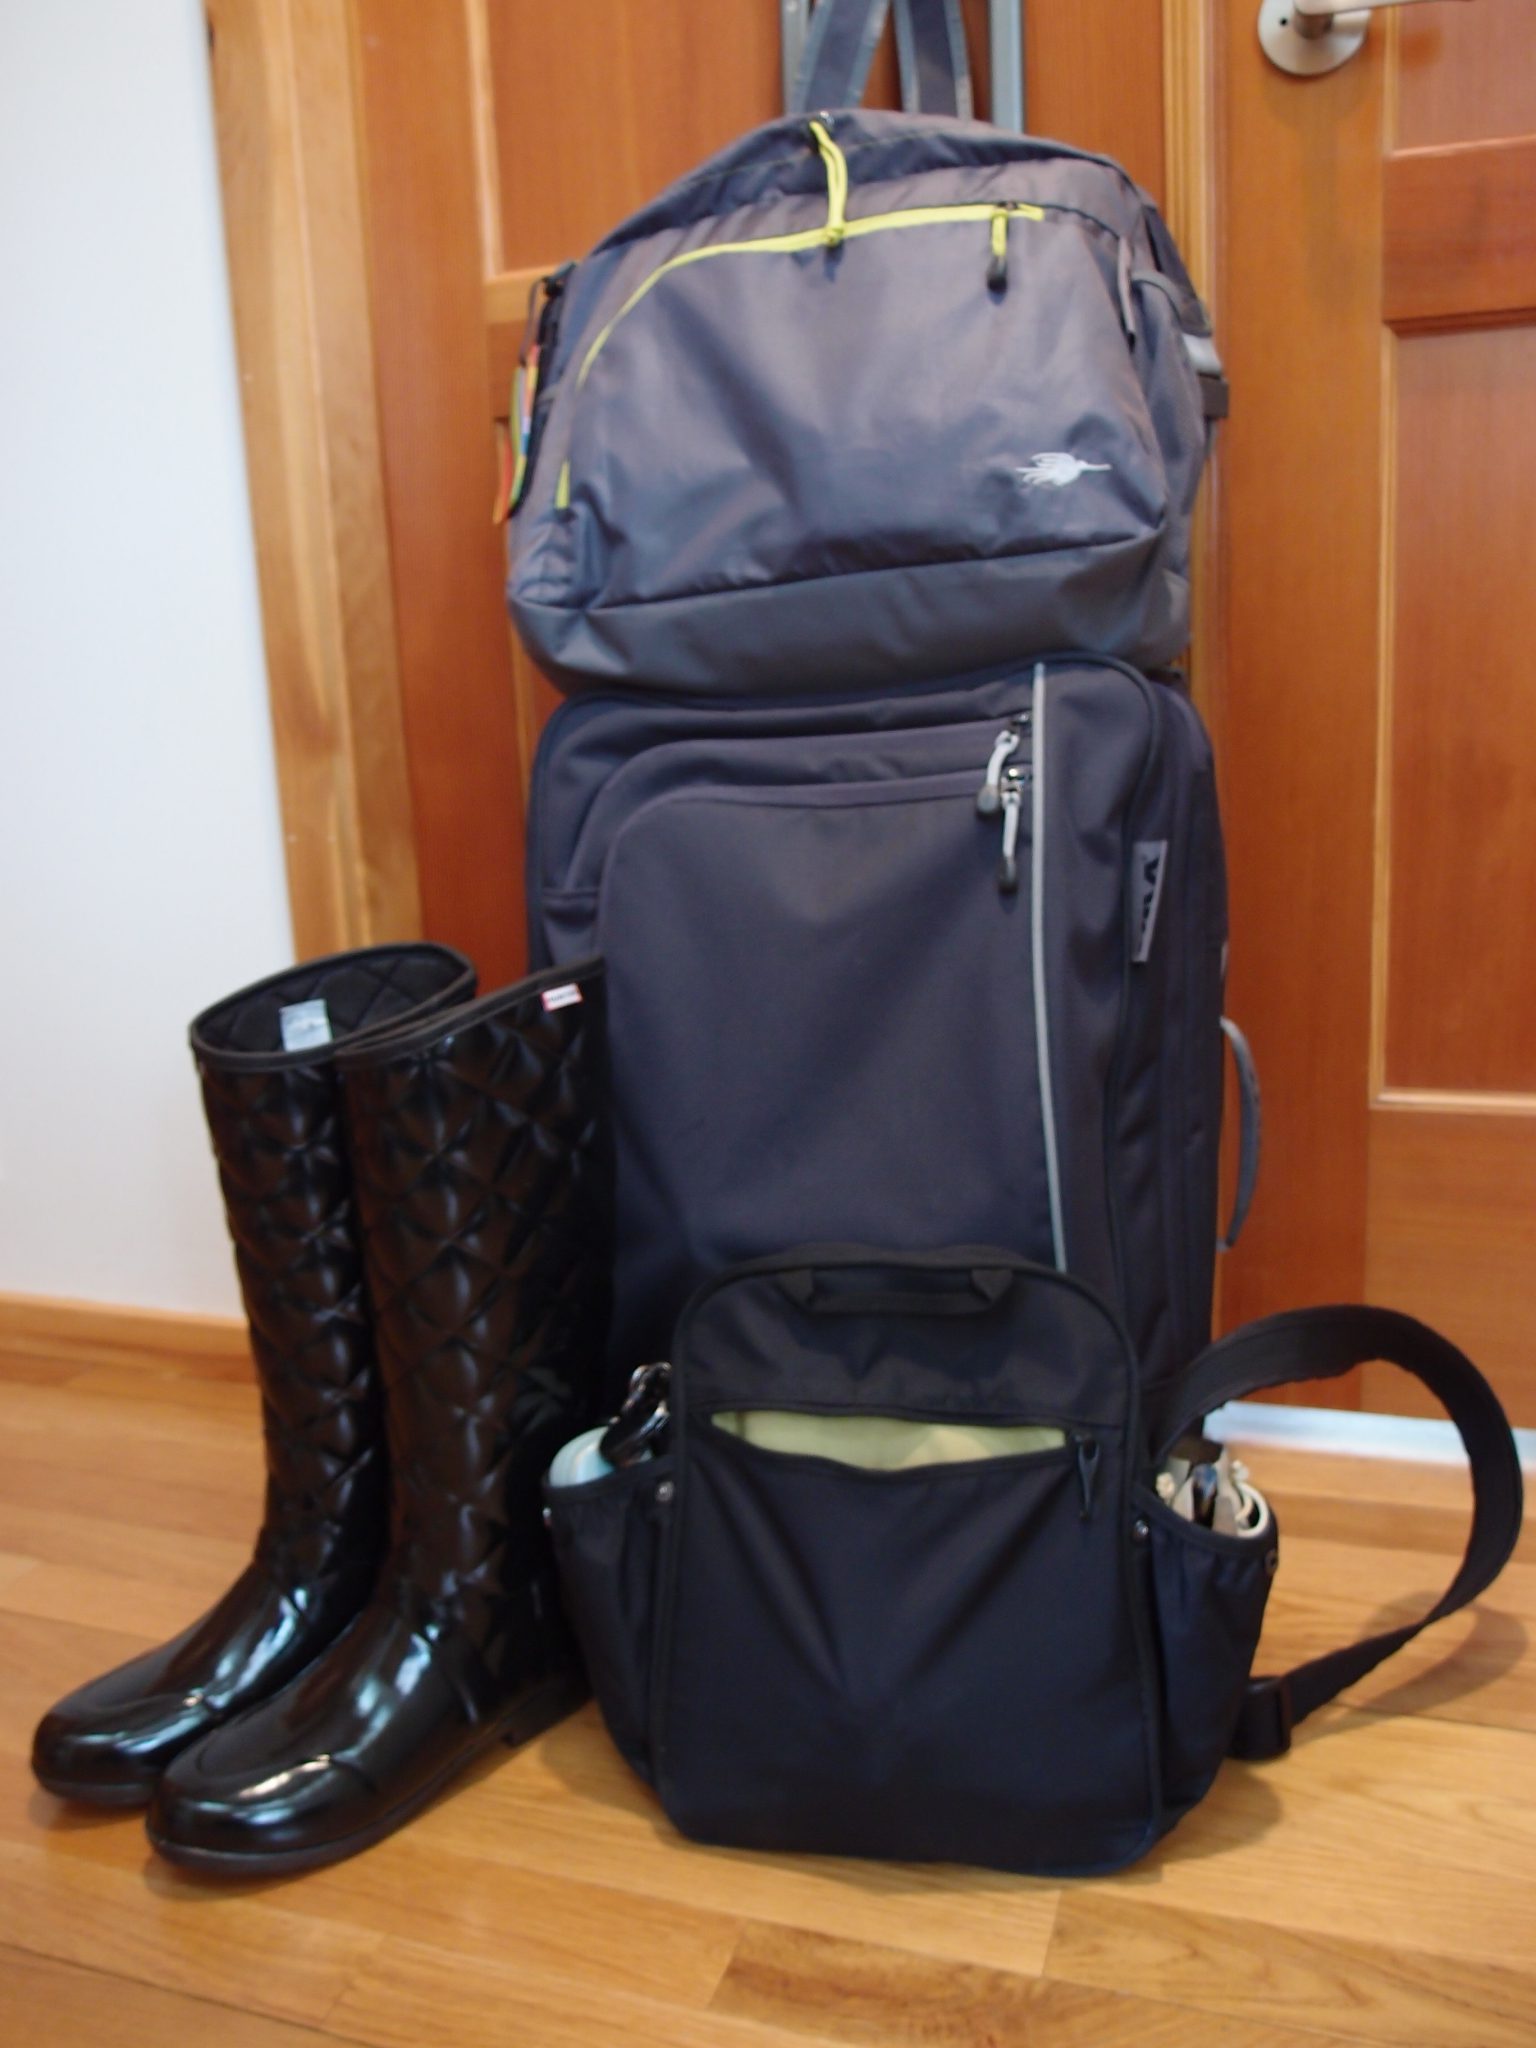 Apart from the clothes on my back, this is all I'll drag along, during my 41-day journey to England and Italy.